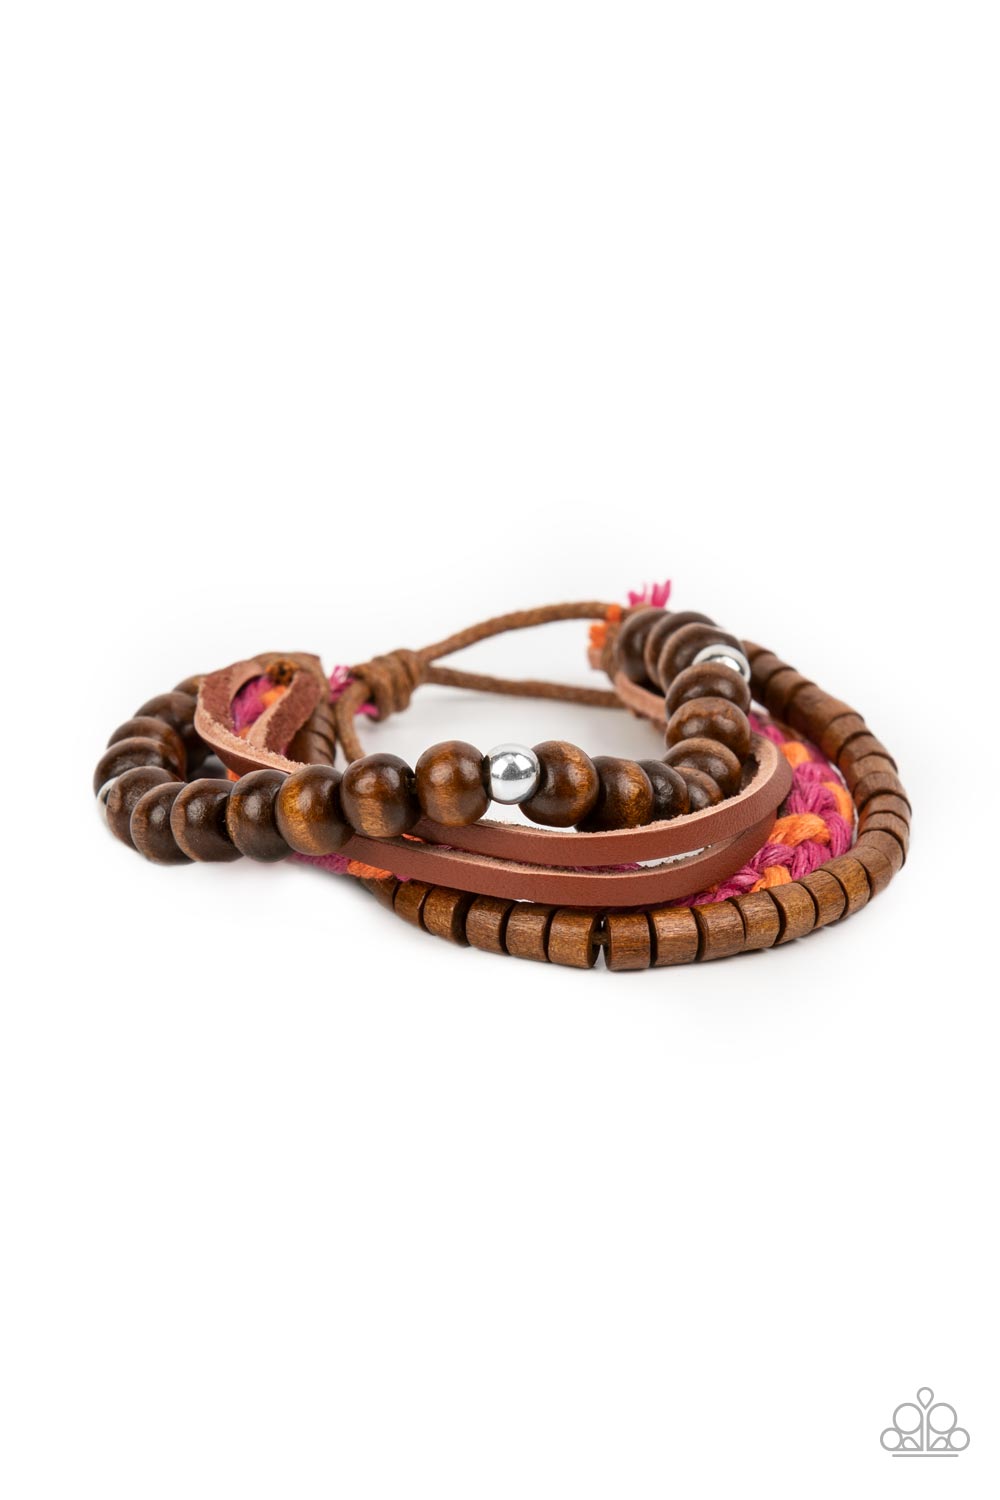 Timberland Trendsetter - Pink and Orange Wood Bracelet - Paparazzi Accessories